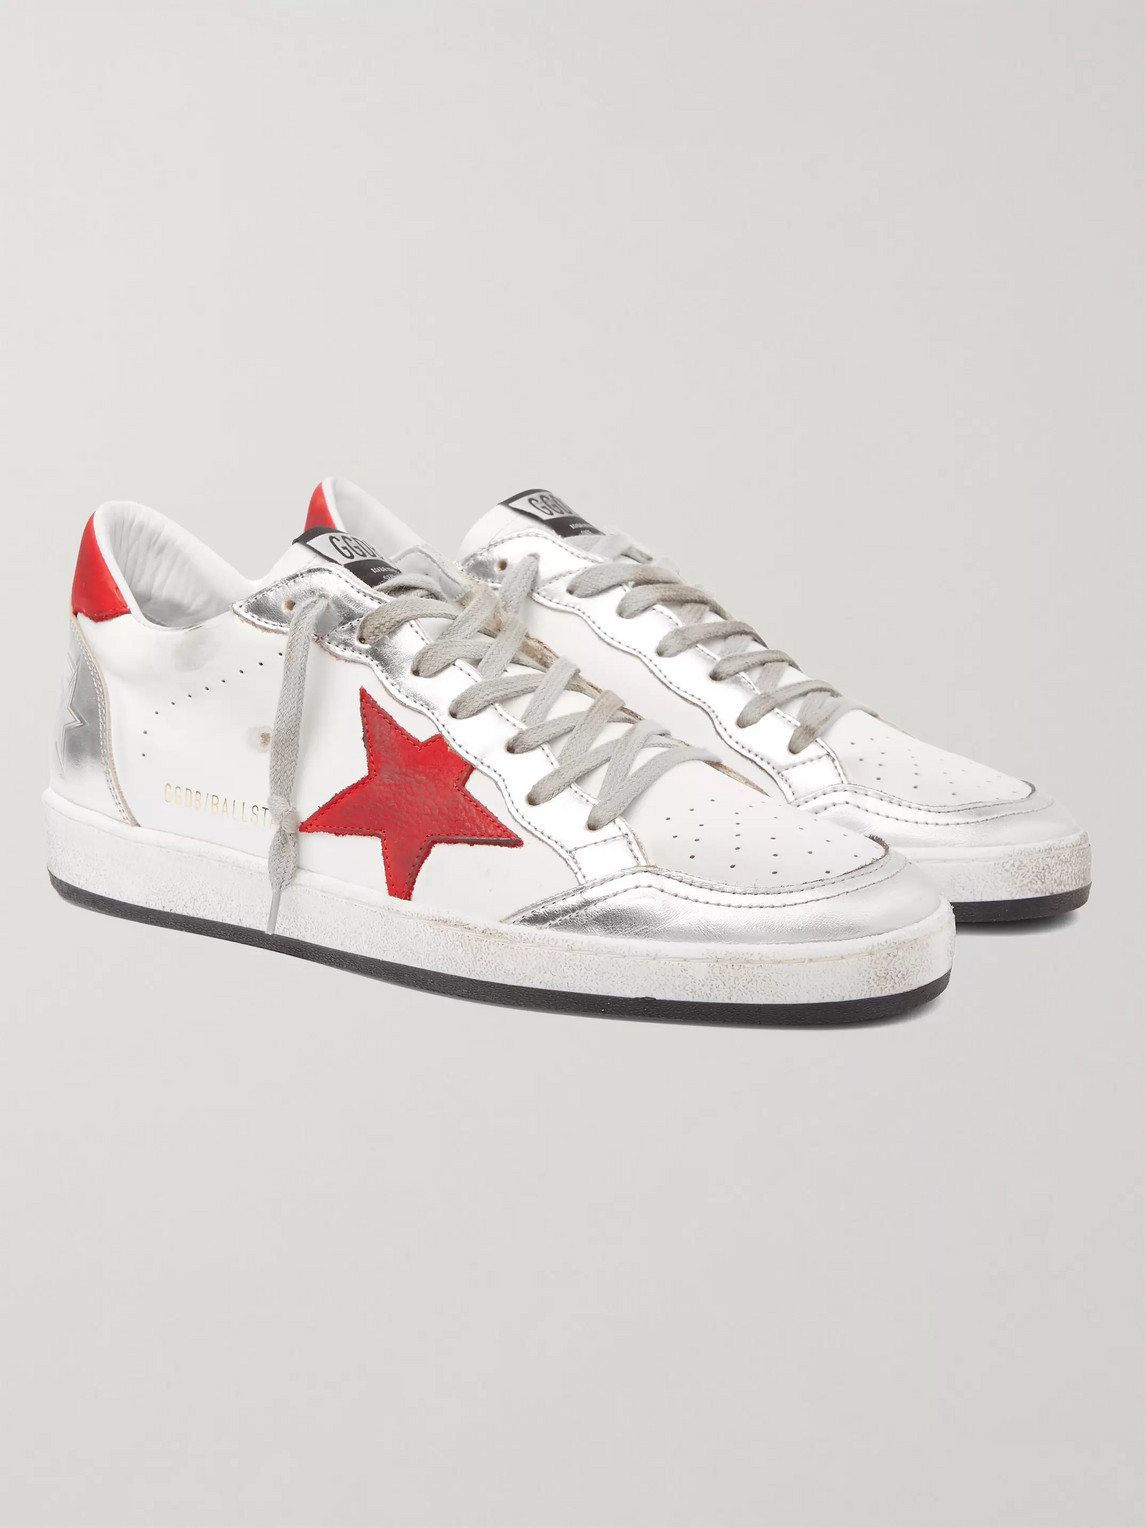 GOLDEN GOOSE BALL STAR DISTRESSED LEATHER SNEAKERS